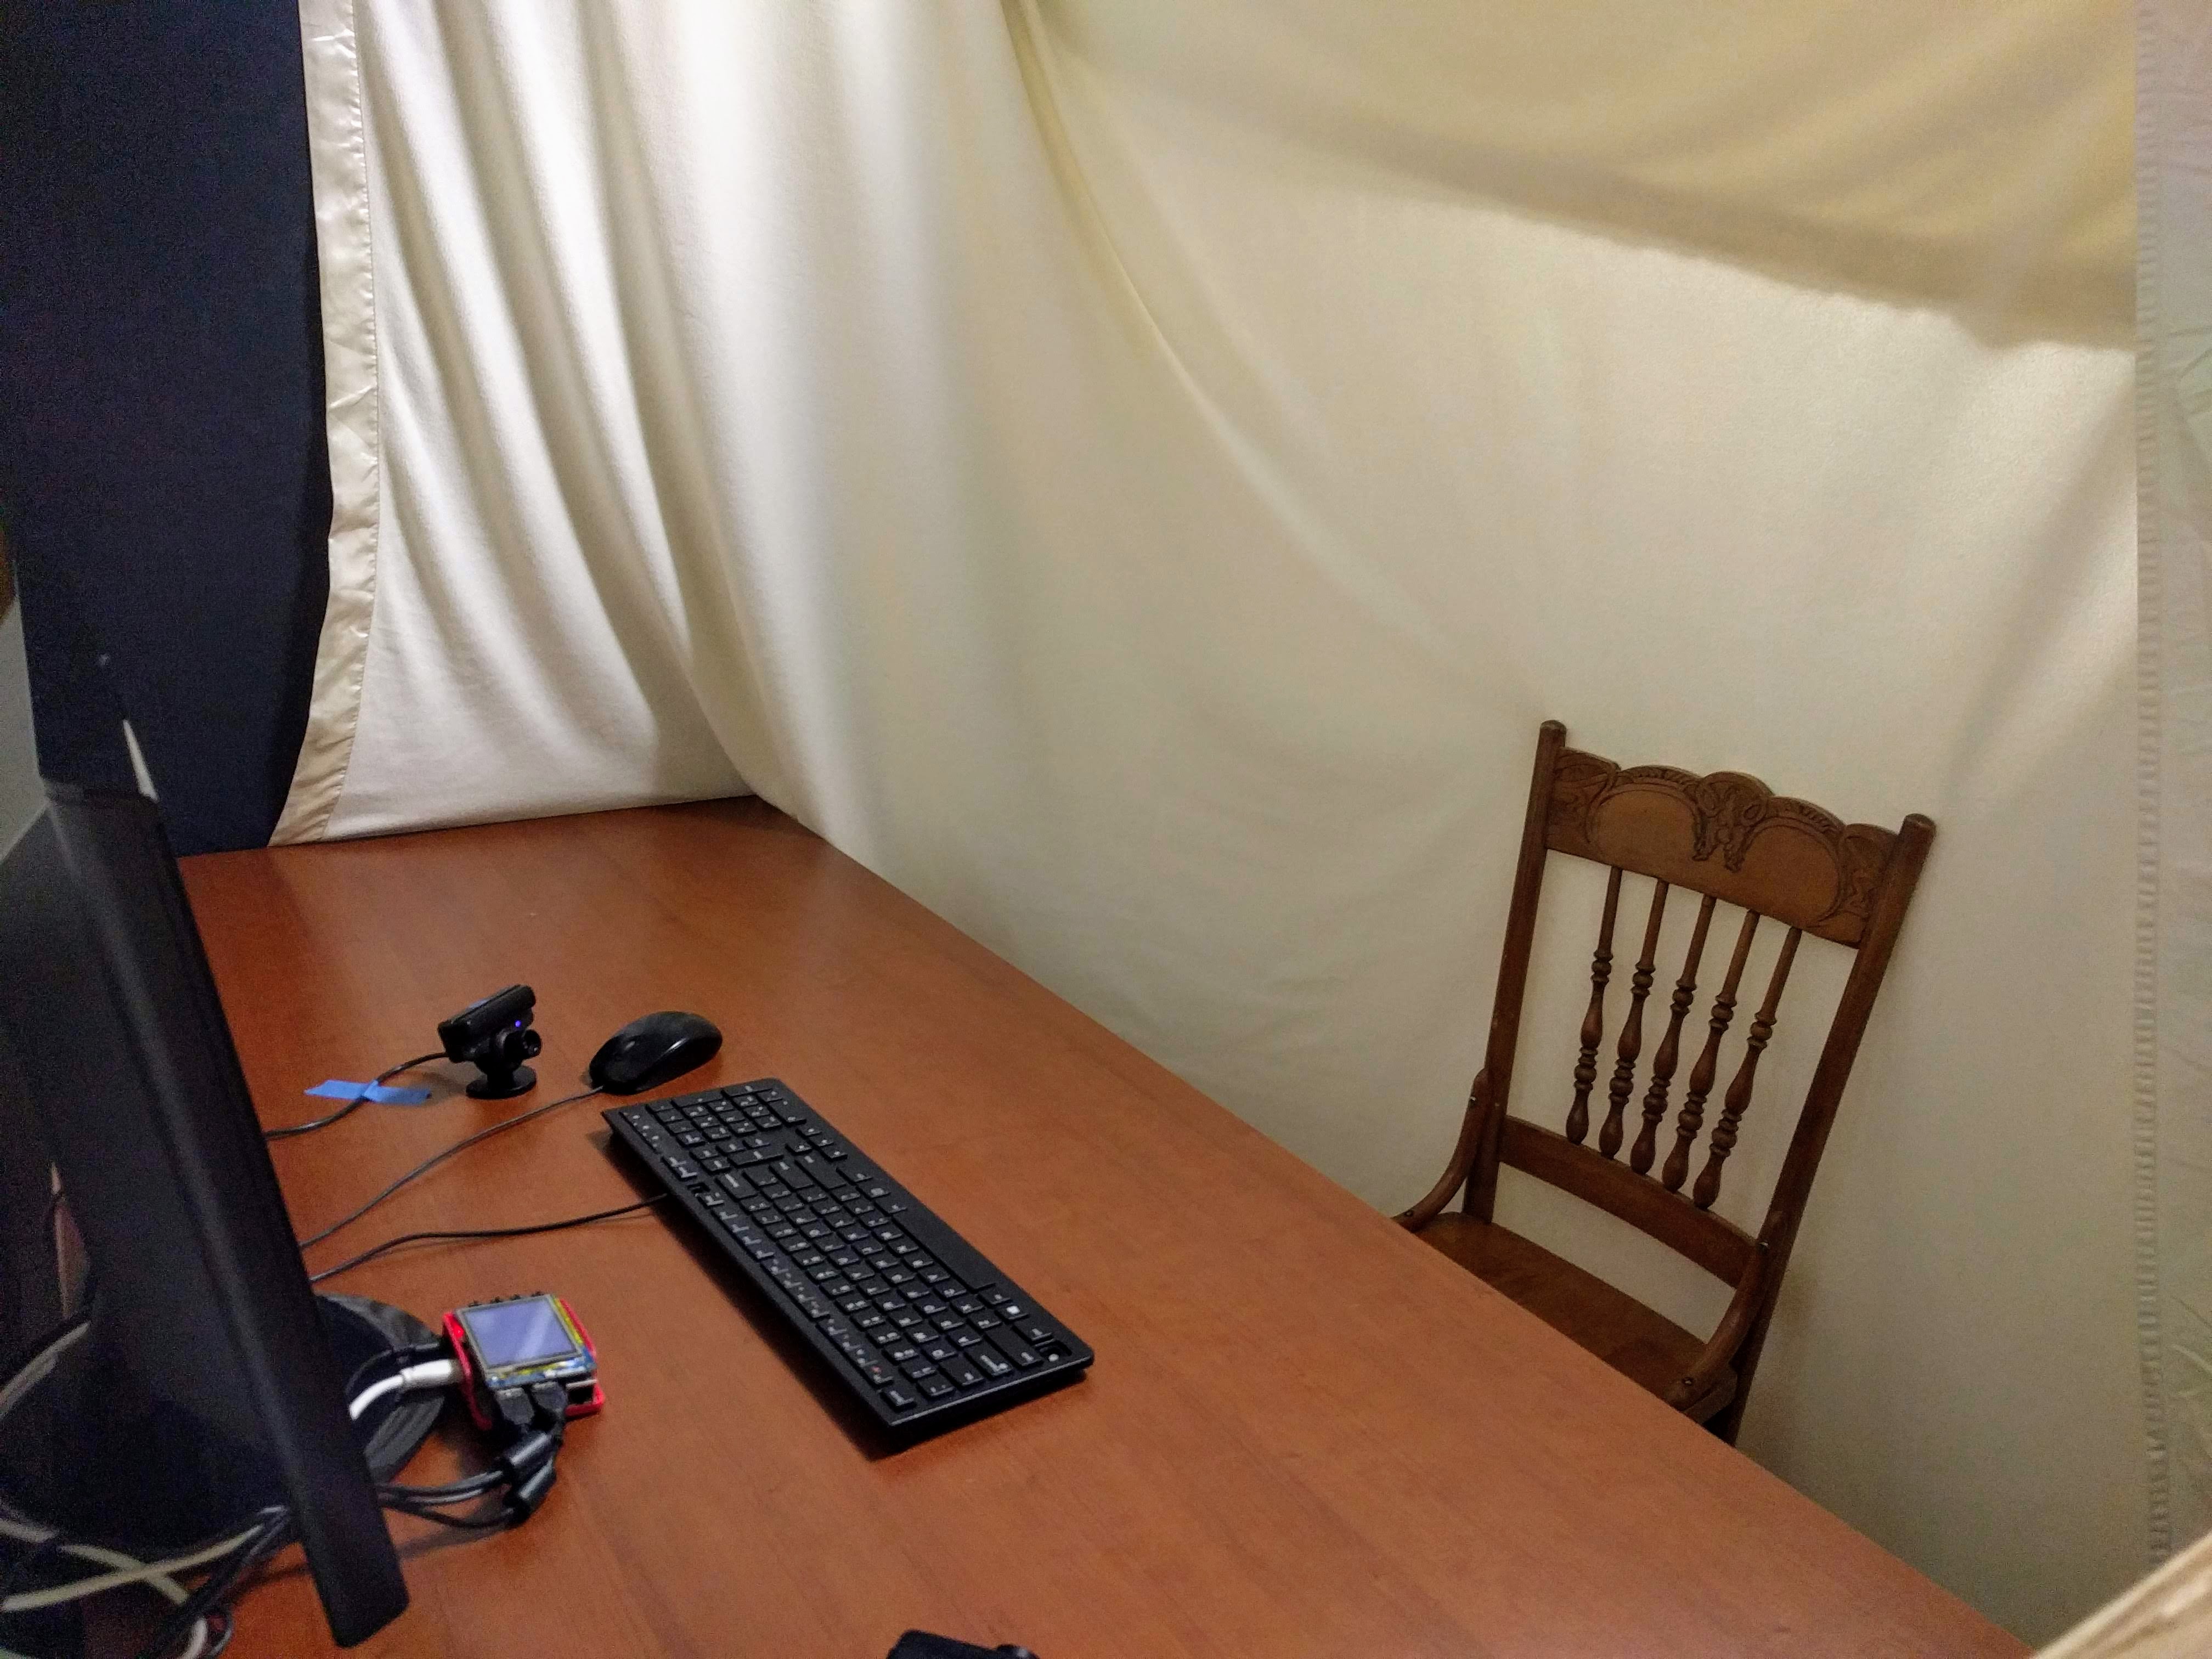 Theremin playing station atop a desk with white blanket hanging behind desk chair to provide neutral background